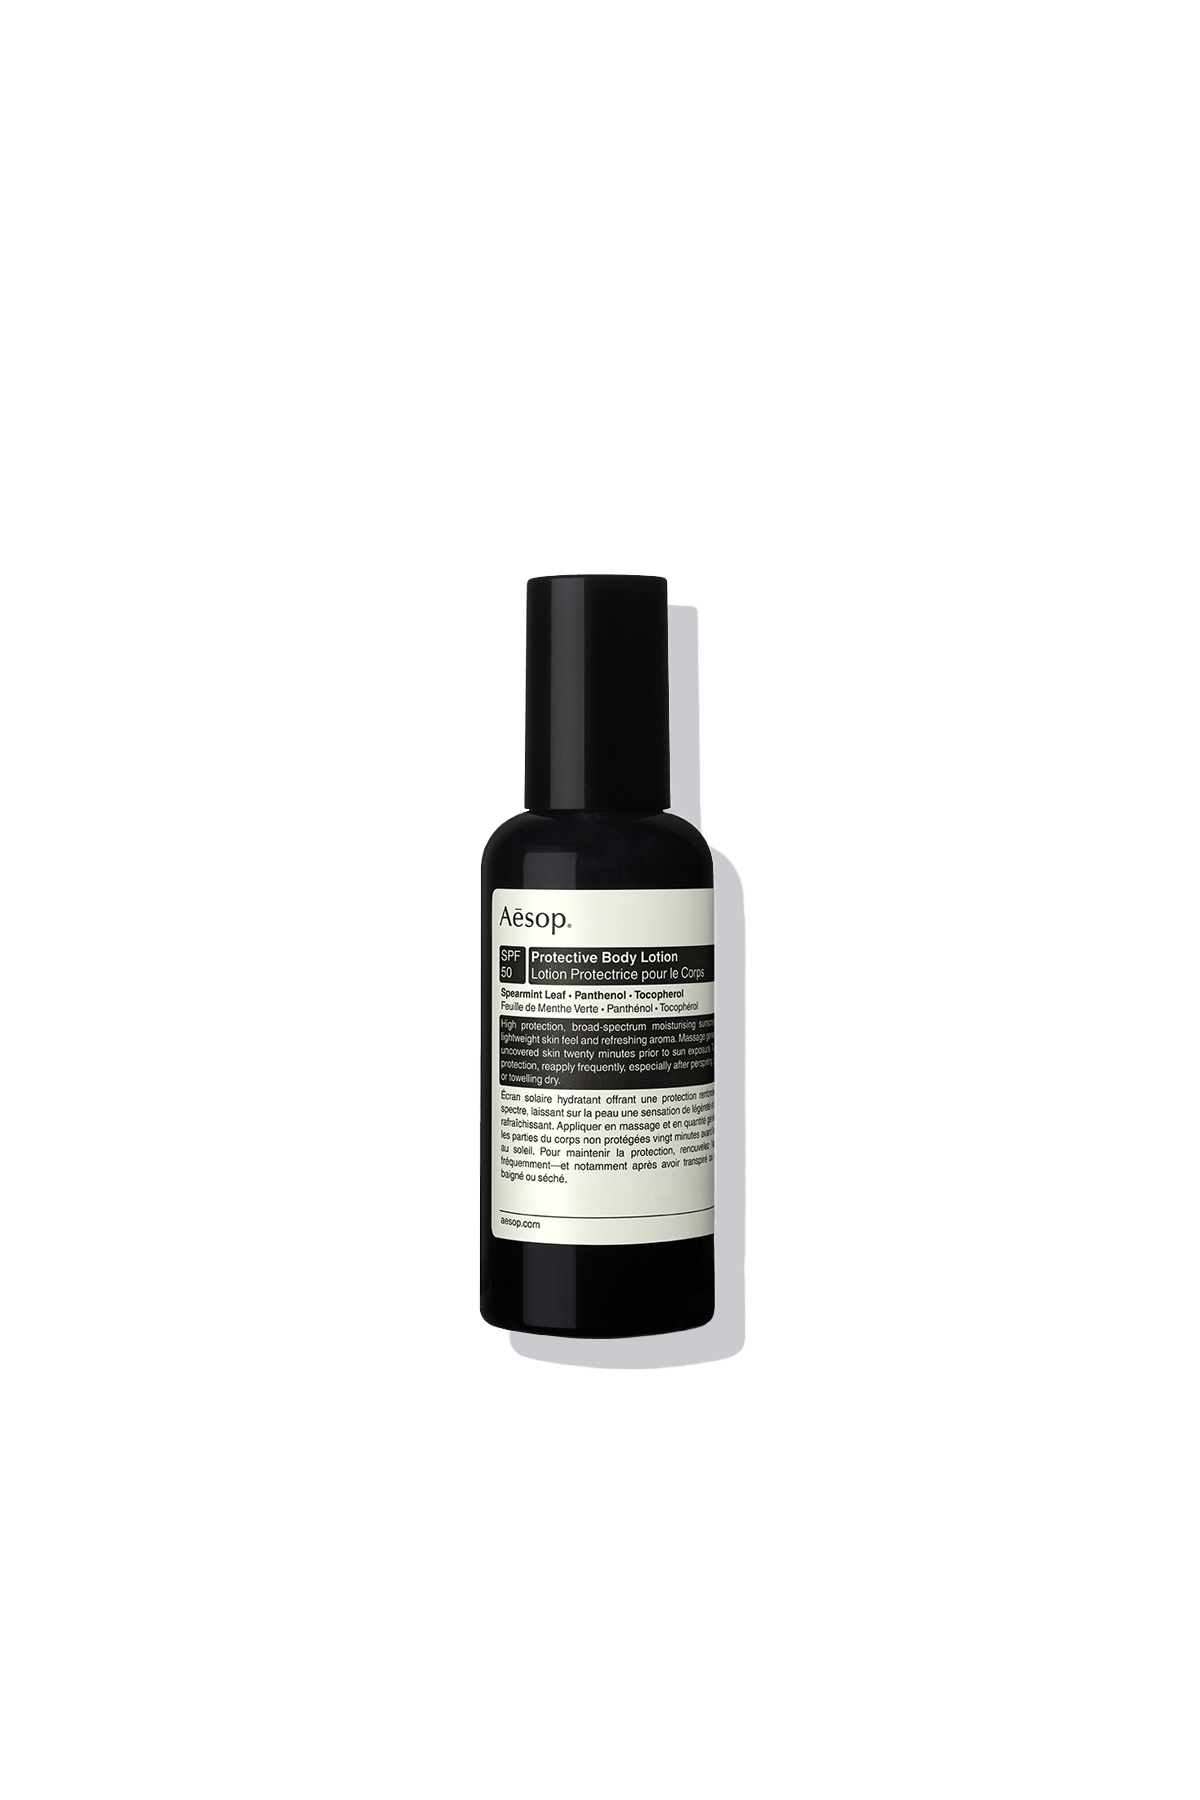 Product_Aesop-04.png